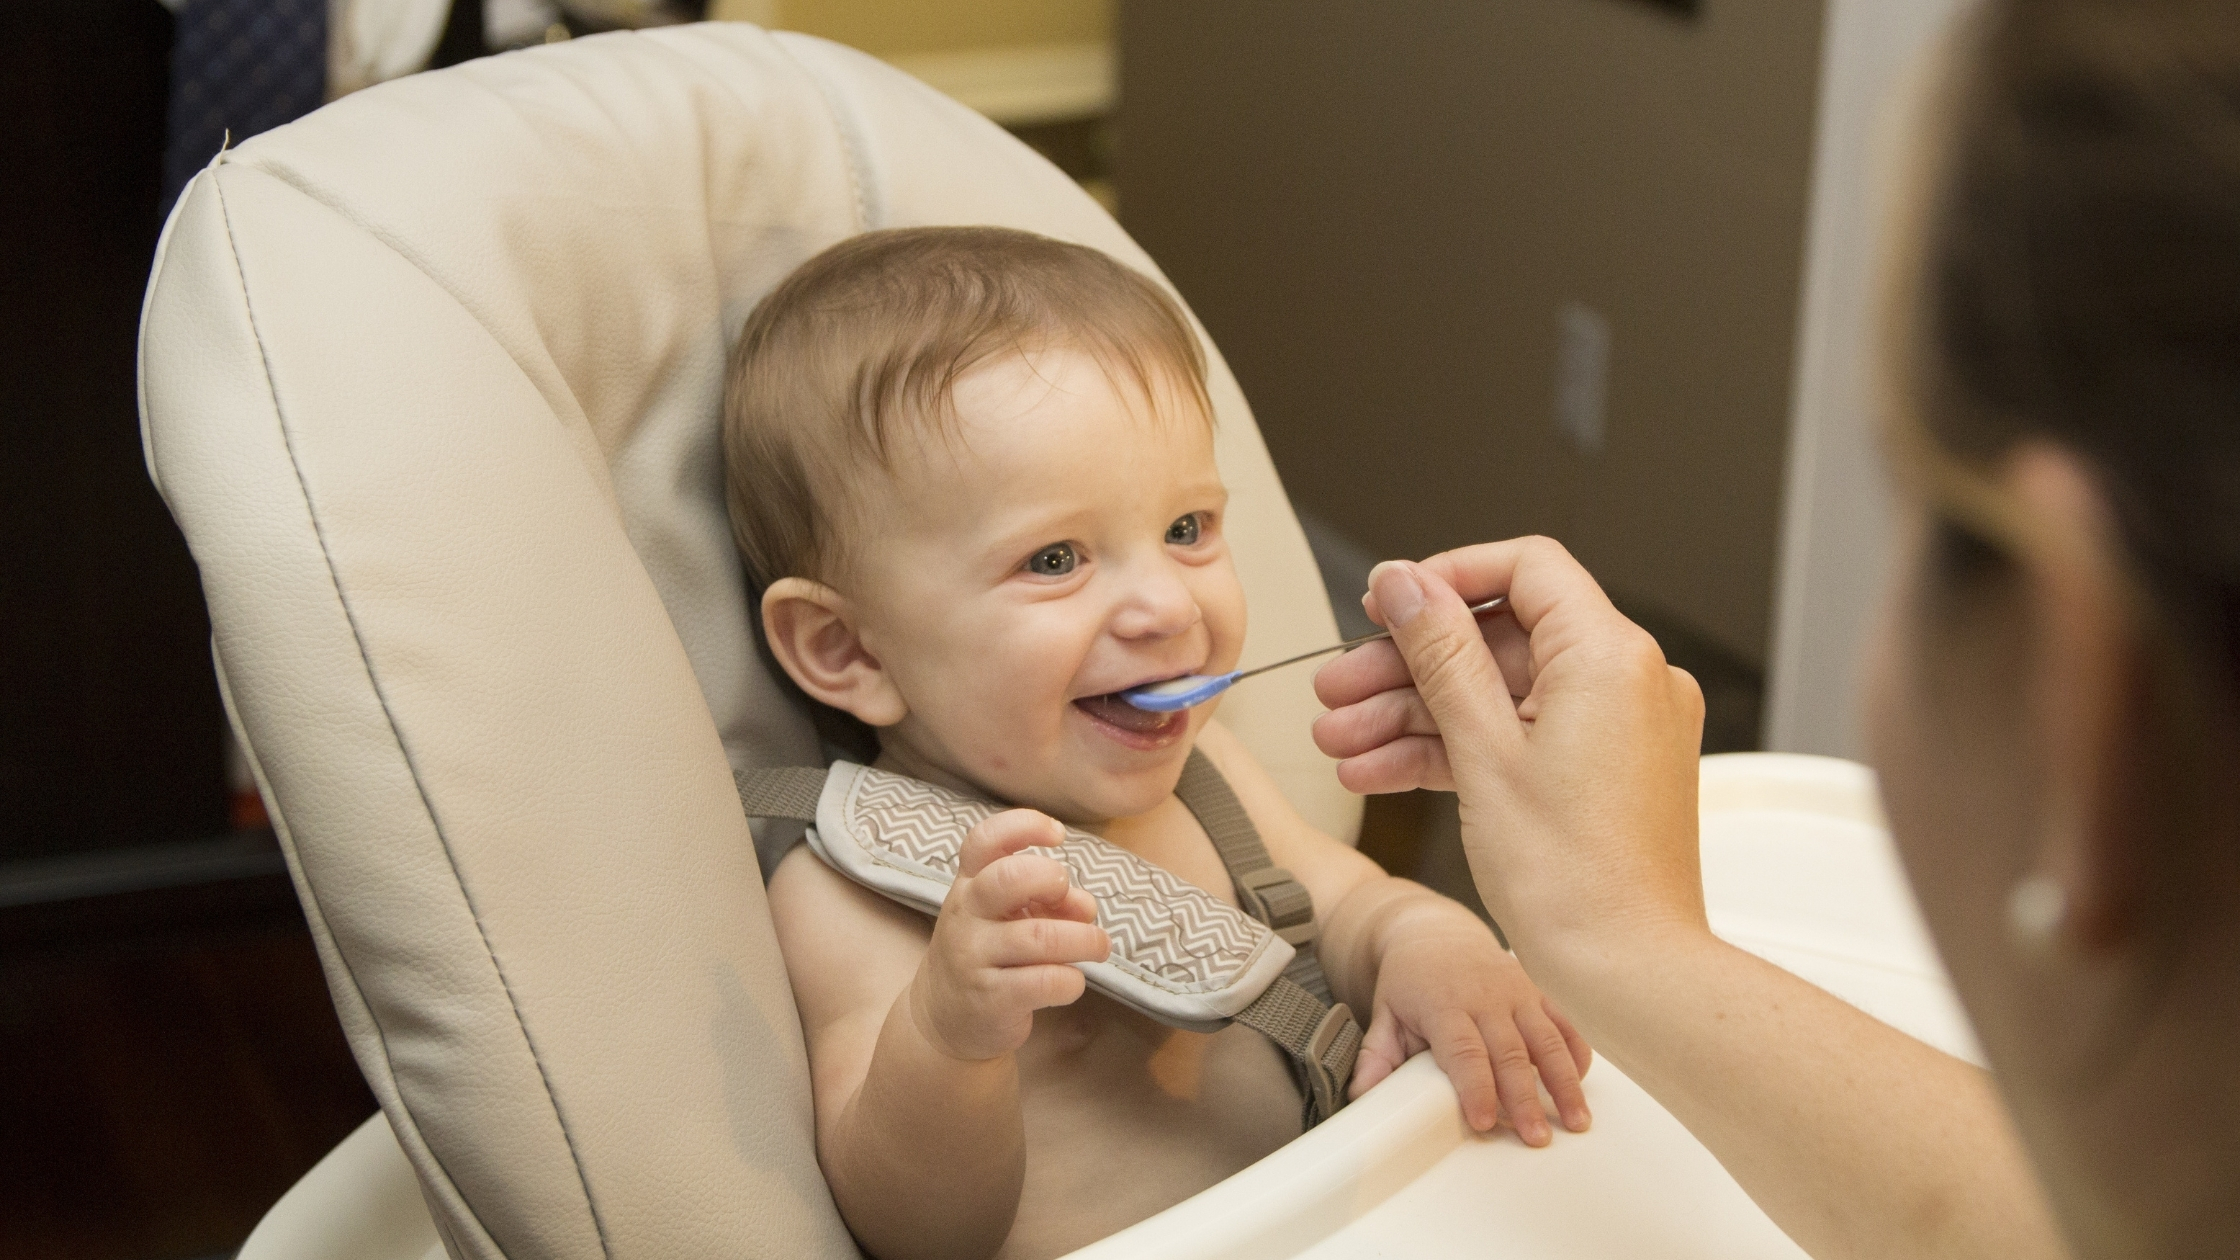 When Can Babies Begin Eating Solid Food?